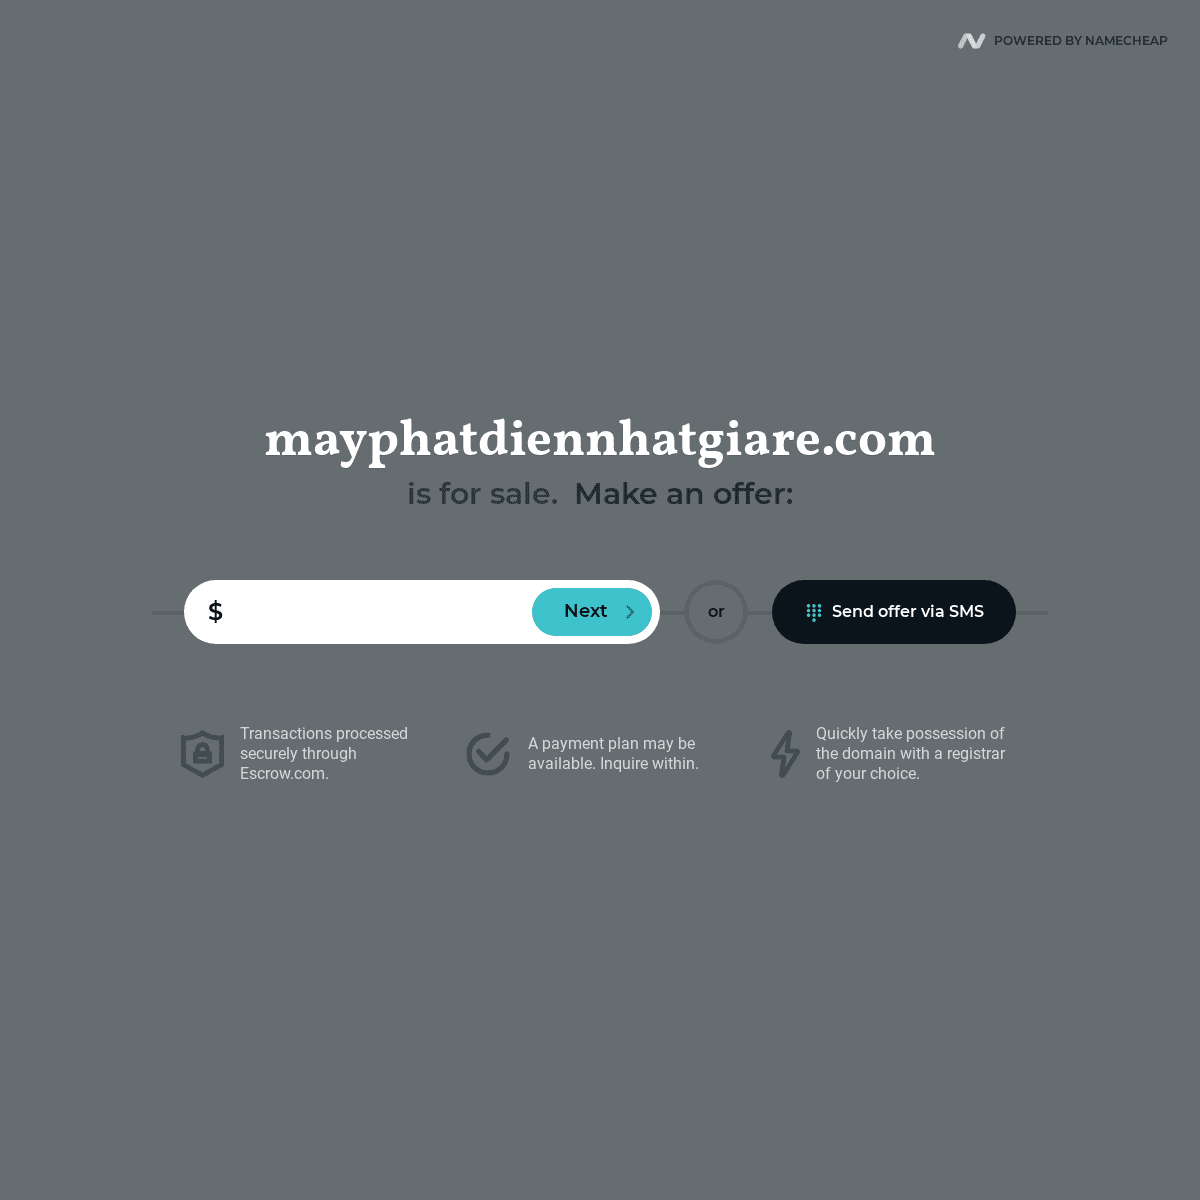 A complete backup of https://mayphatdiennhatgiare.com